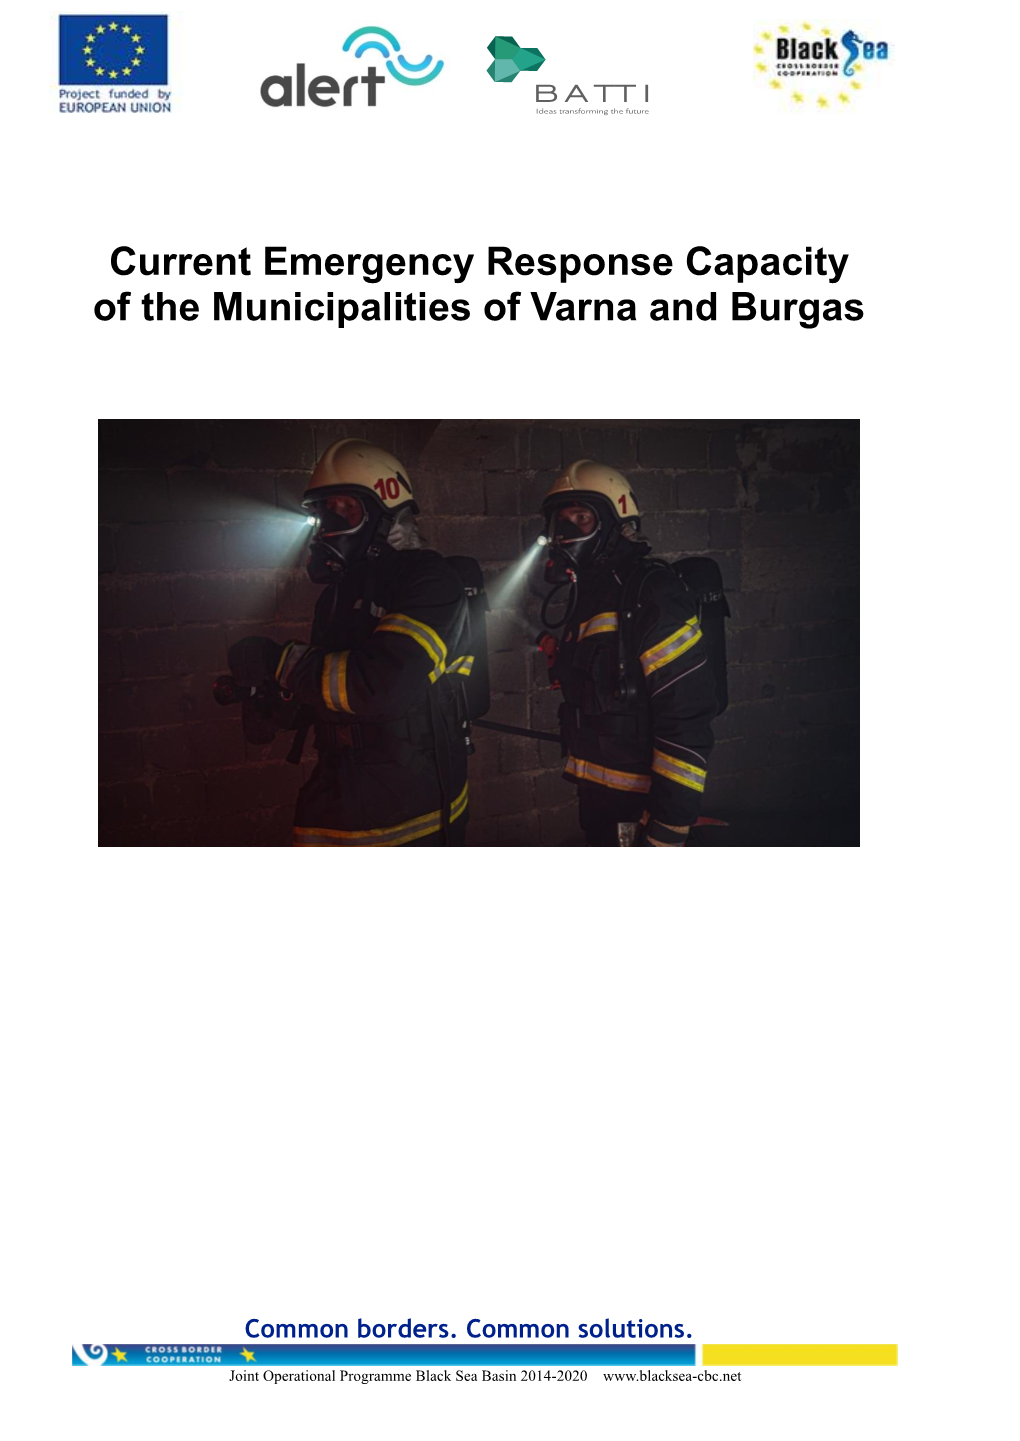 Current Emergency Response Capacity of the Municipalities of Varna and Burgas